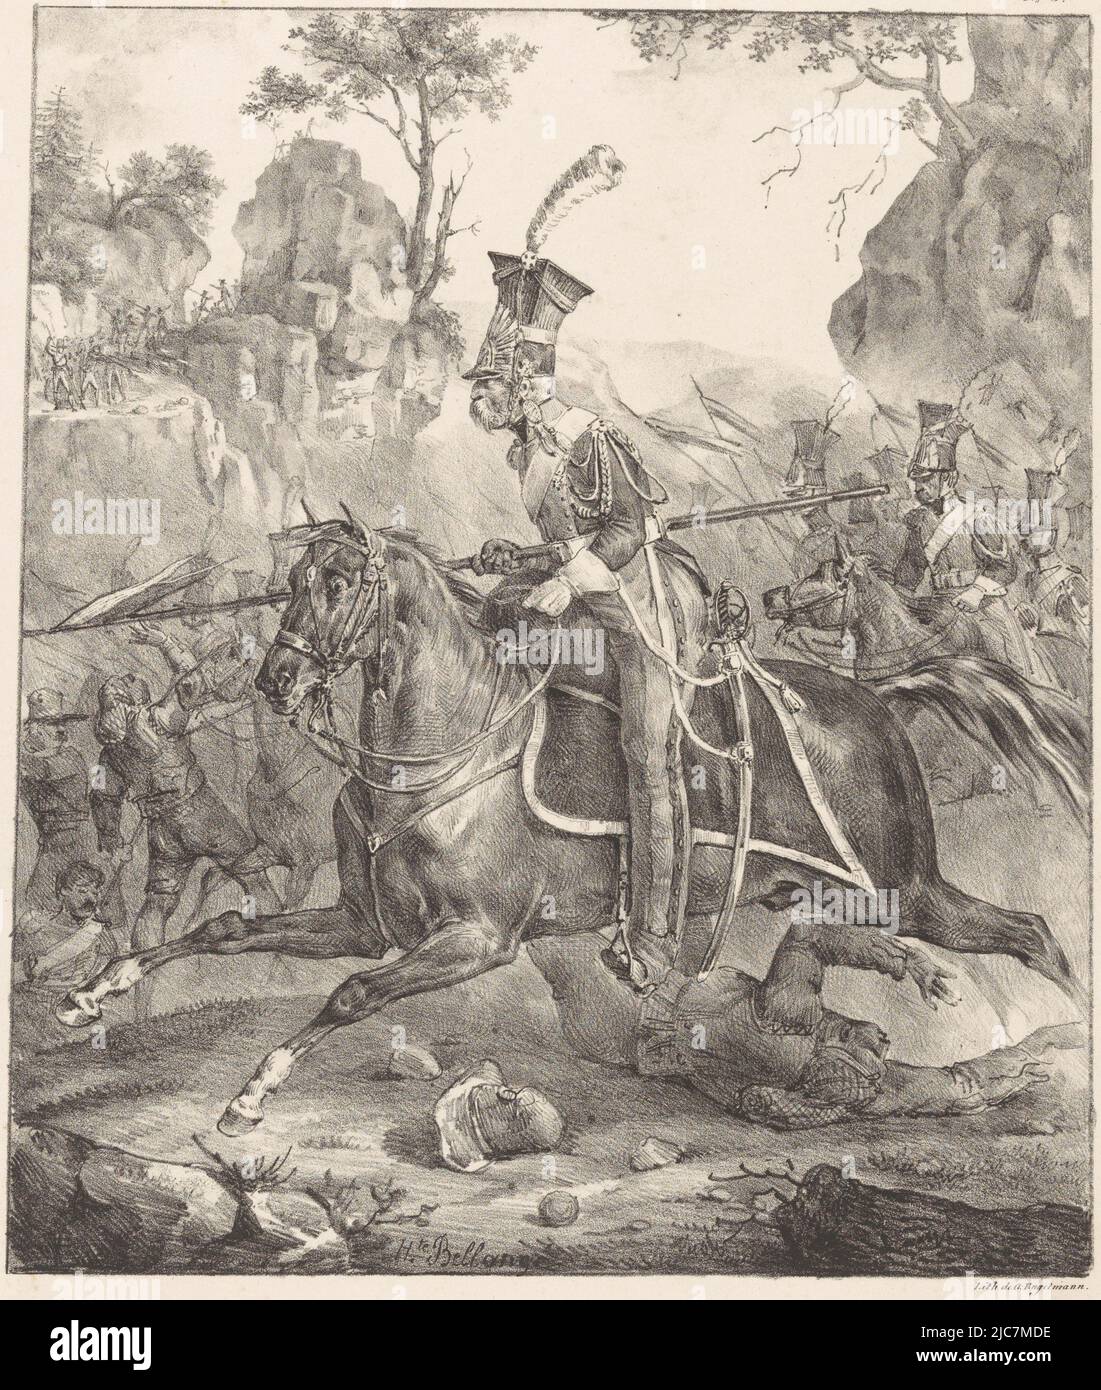 Polish lancer in full gallop on the battlefield Lancier polonais en grande tenue Uniforms of the former imperial guard , print maker: Hippolyte Bellangé, (mentioned on object), printer: Gottfried Engelmann, (mentioned on object), Paris, 1820, paper, h 553 mm × w 368 mm Stock Photo